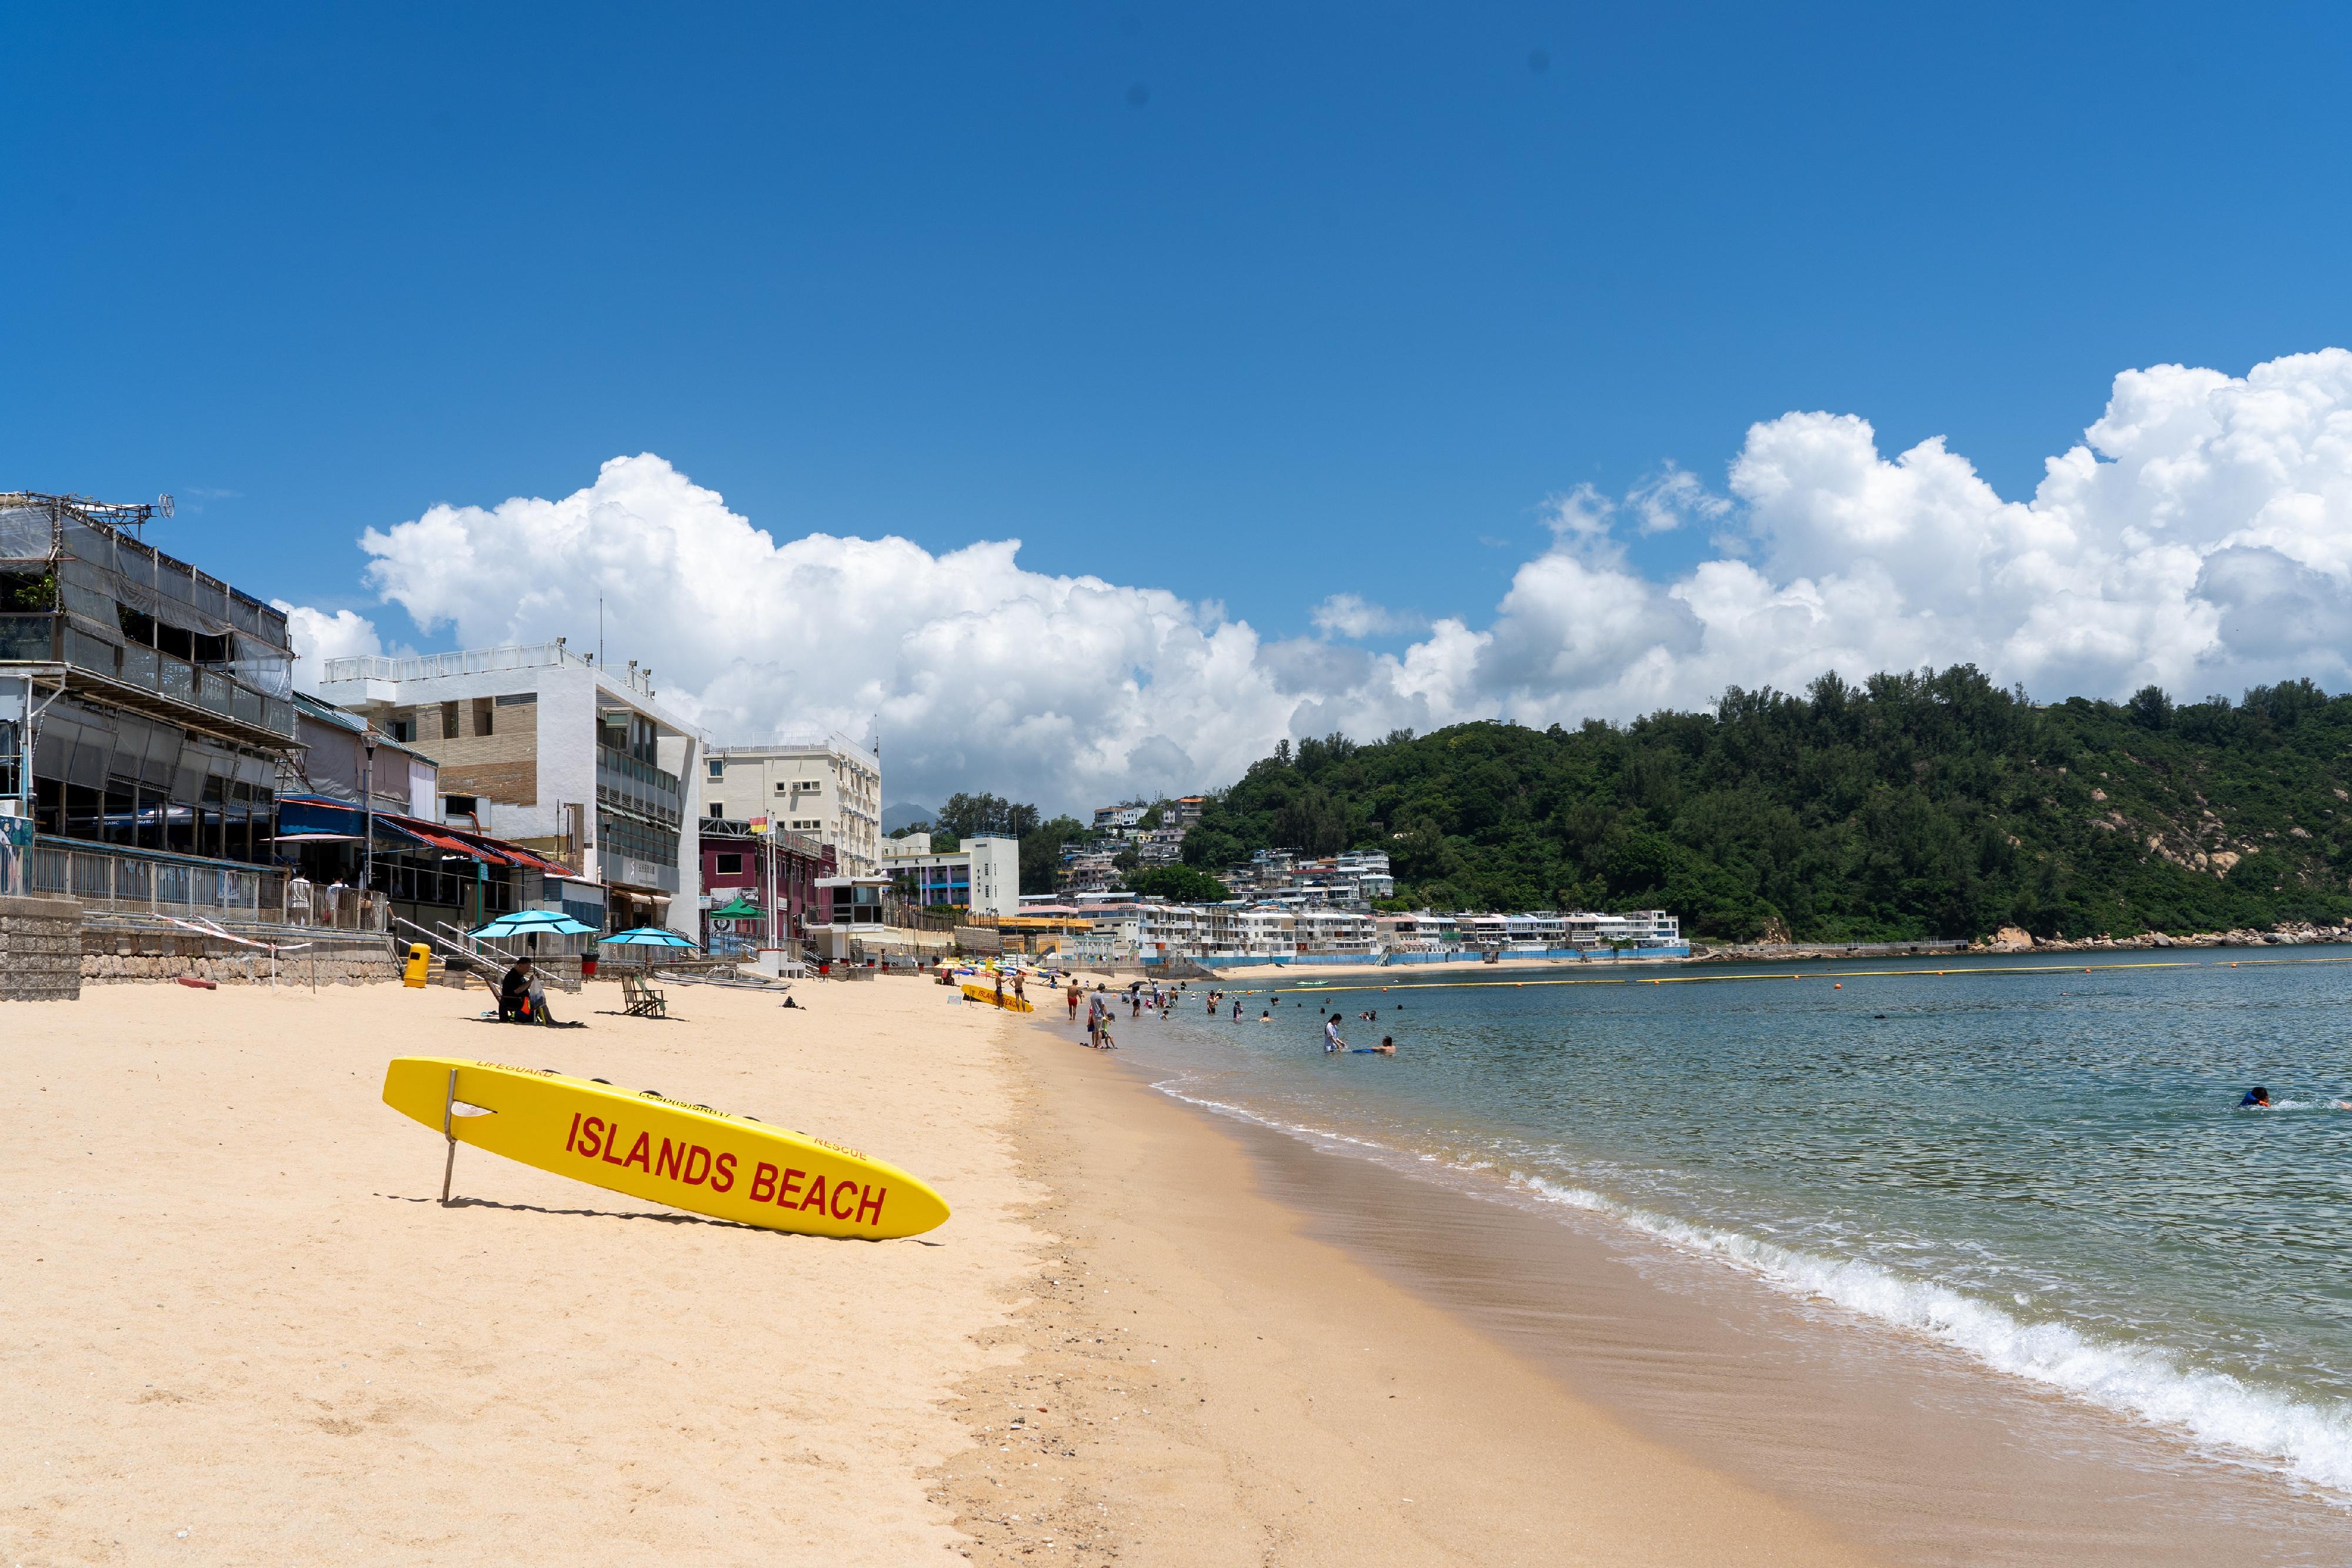 The 2023 Beach Water Quality Report reveals that all gazetted beaches in Hong Kong have fully met the bacteriological Water Quality Objective for 14 consecutive years. Photo shows Cheung Chau Tung Wan Beach in Islands District which has been maintaining a "Good" water quality annual ranking since 2007.

